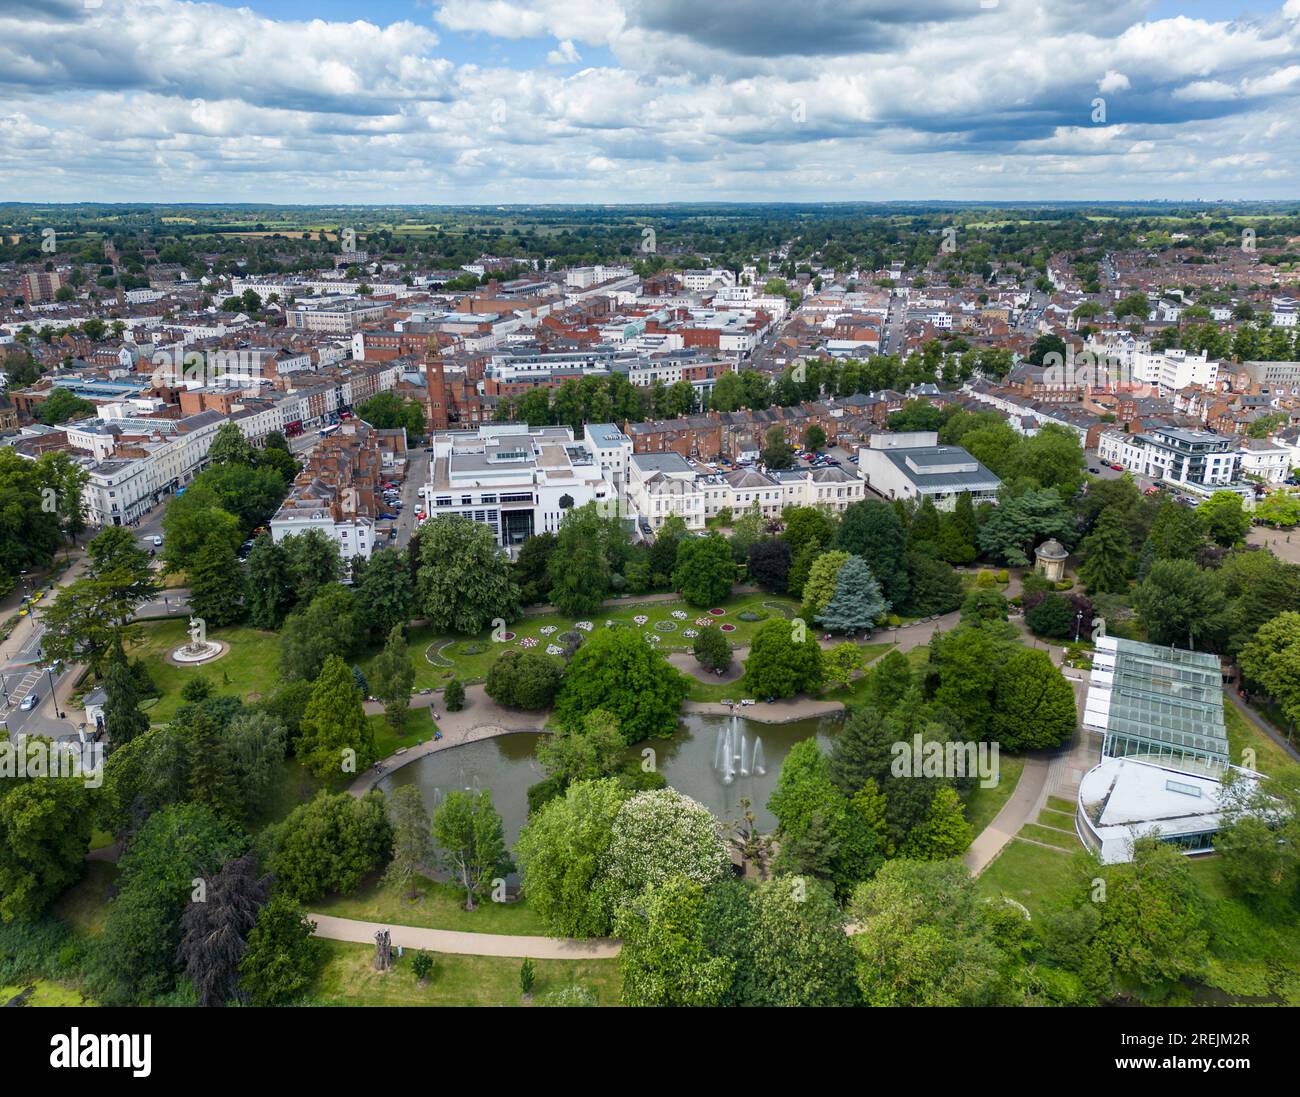 Aerial view of Royal Leamington Spa with Jephson Gardens in the foreground, Warwickshire, England Stock Photo